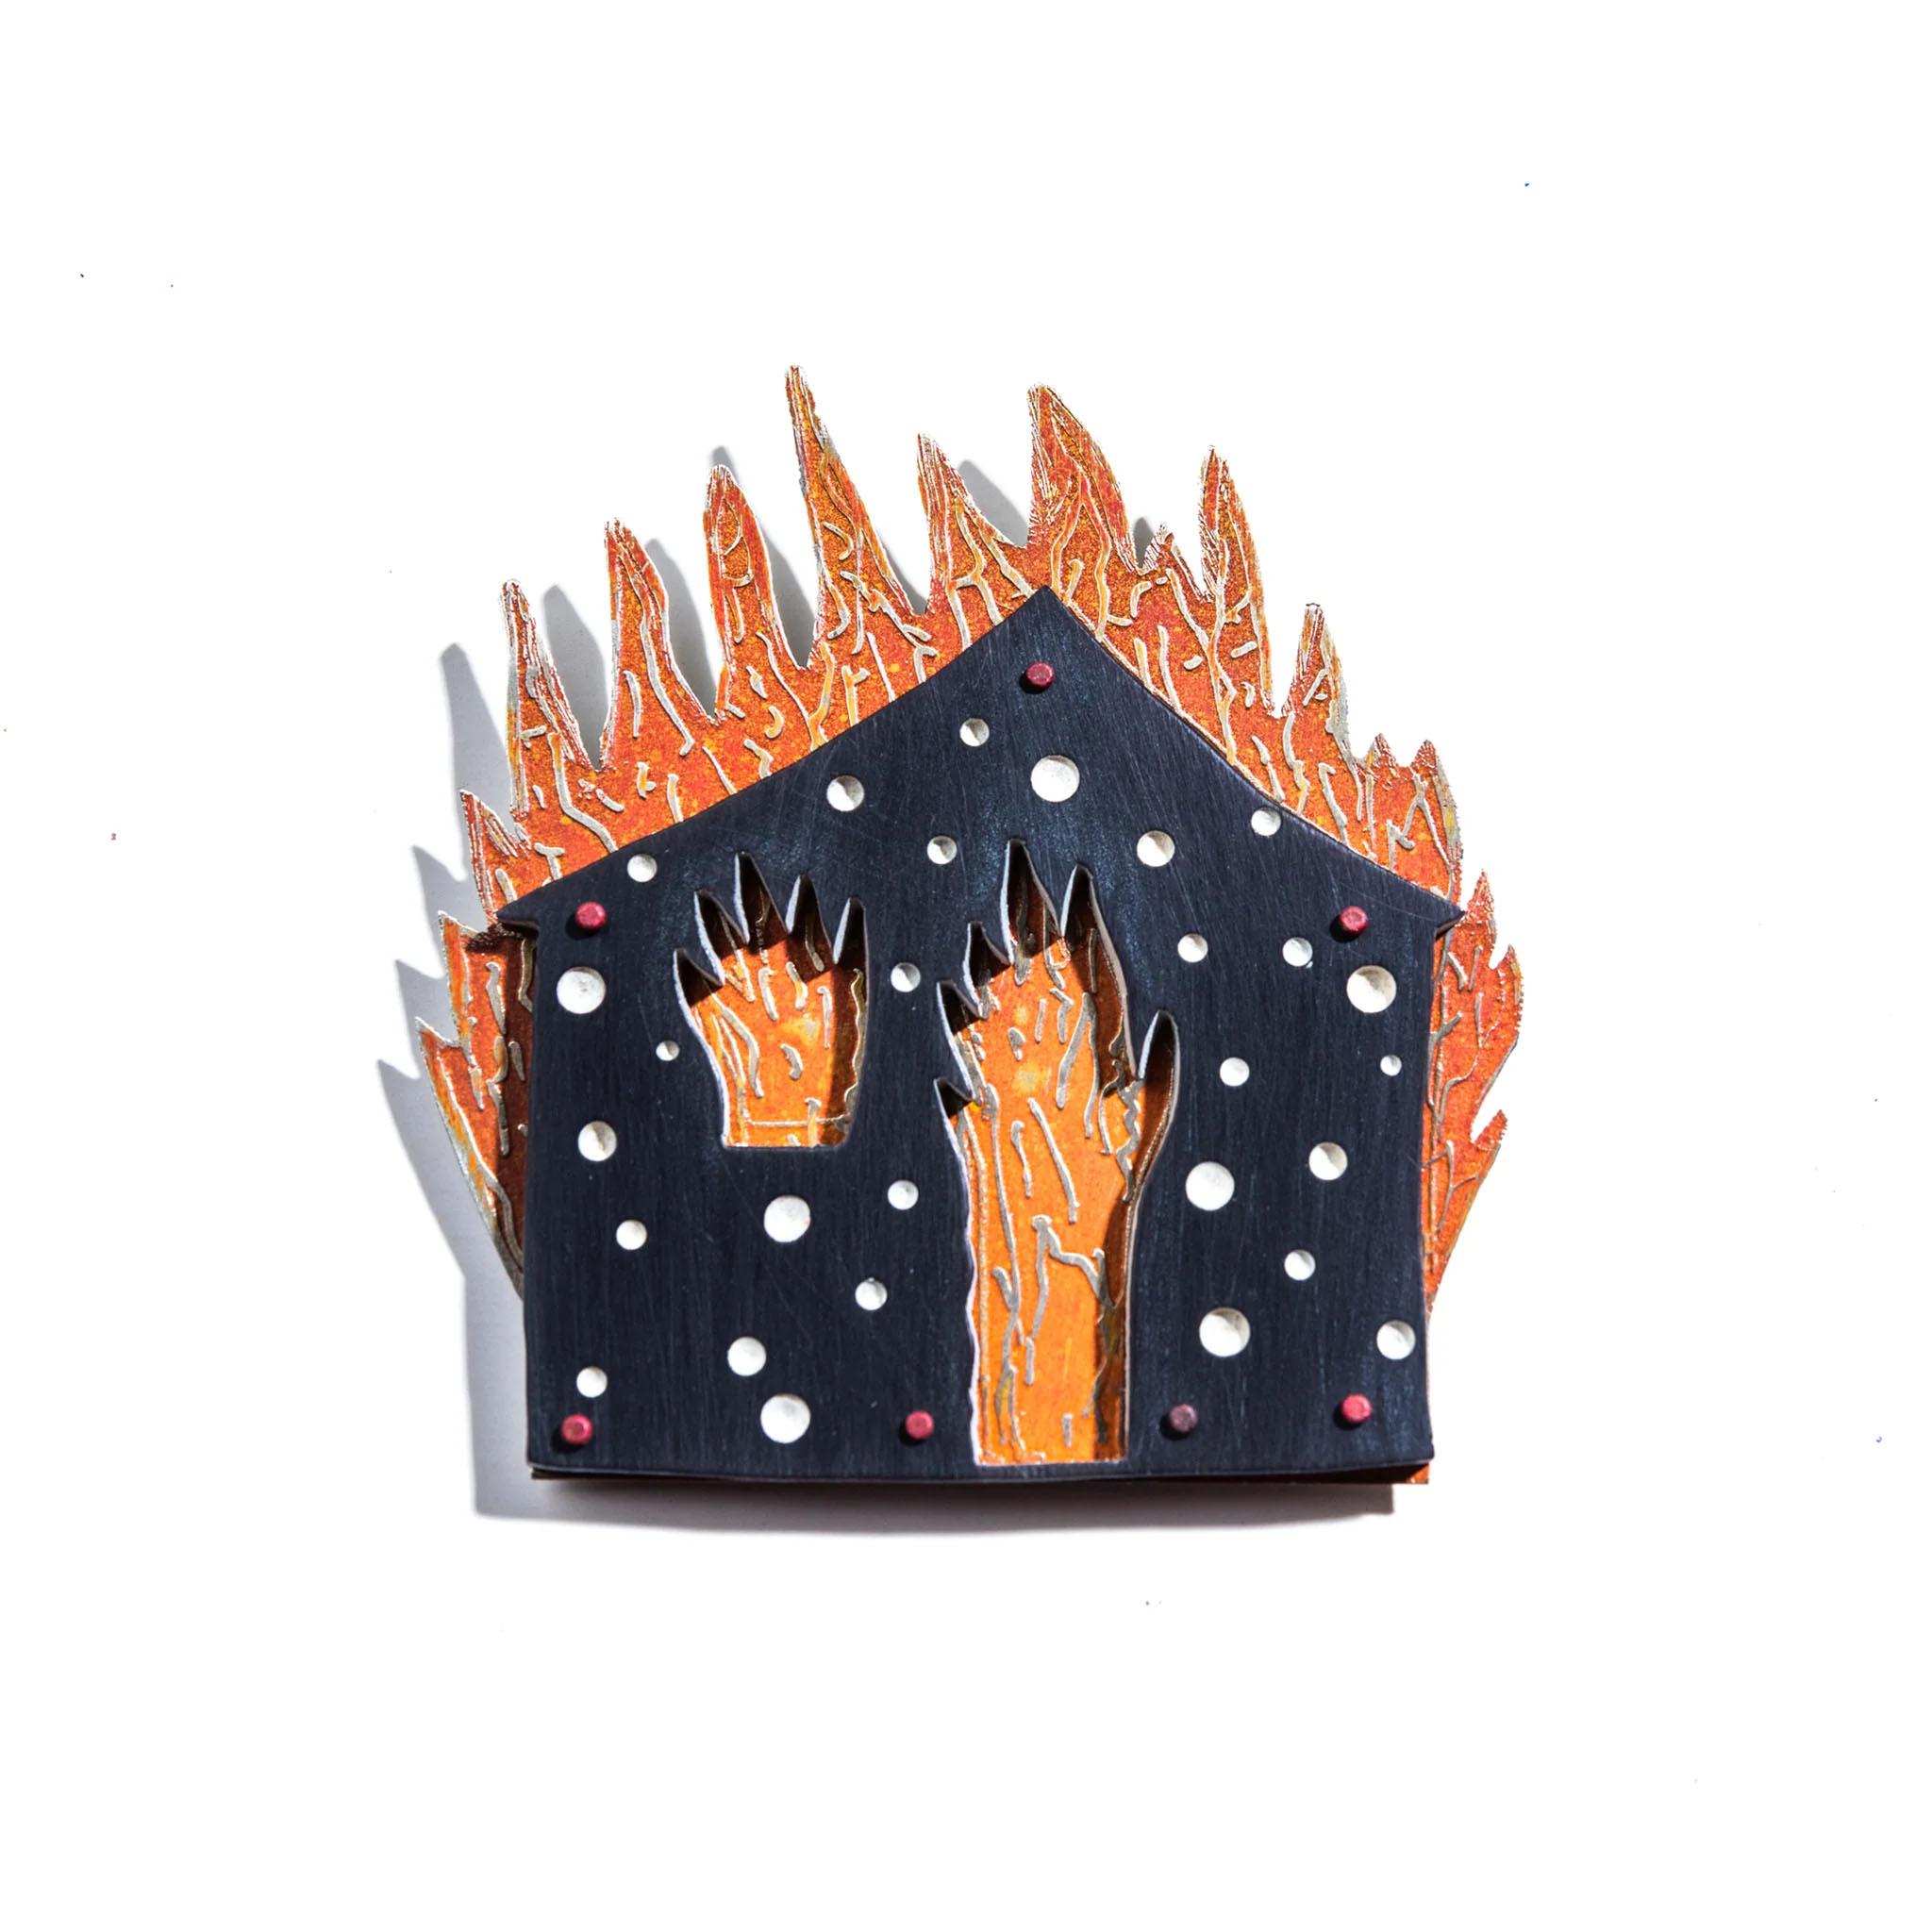 Burning House , jewelry lapel pin  designed by Francis Pavy, made by Thomas Mann - Art by FPA Francis Pavy Artist